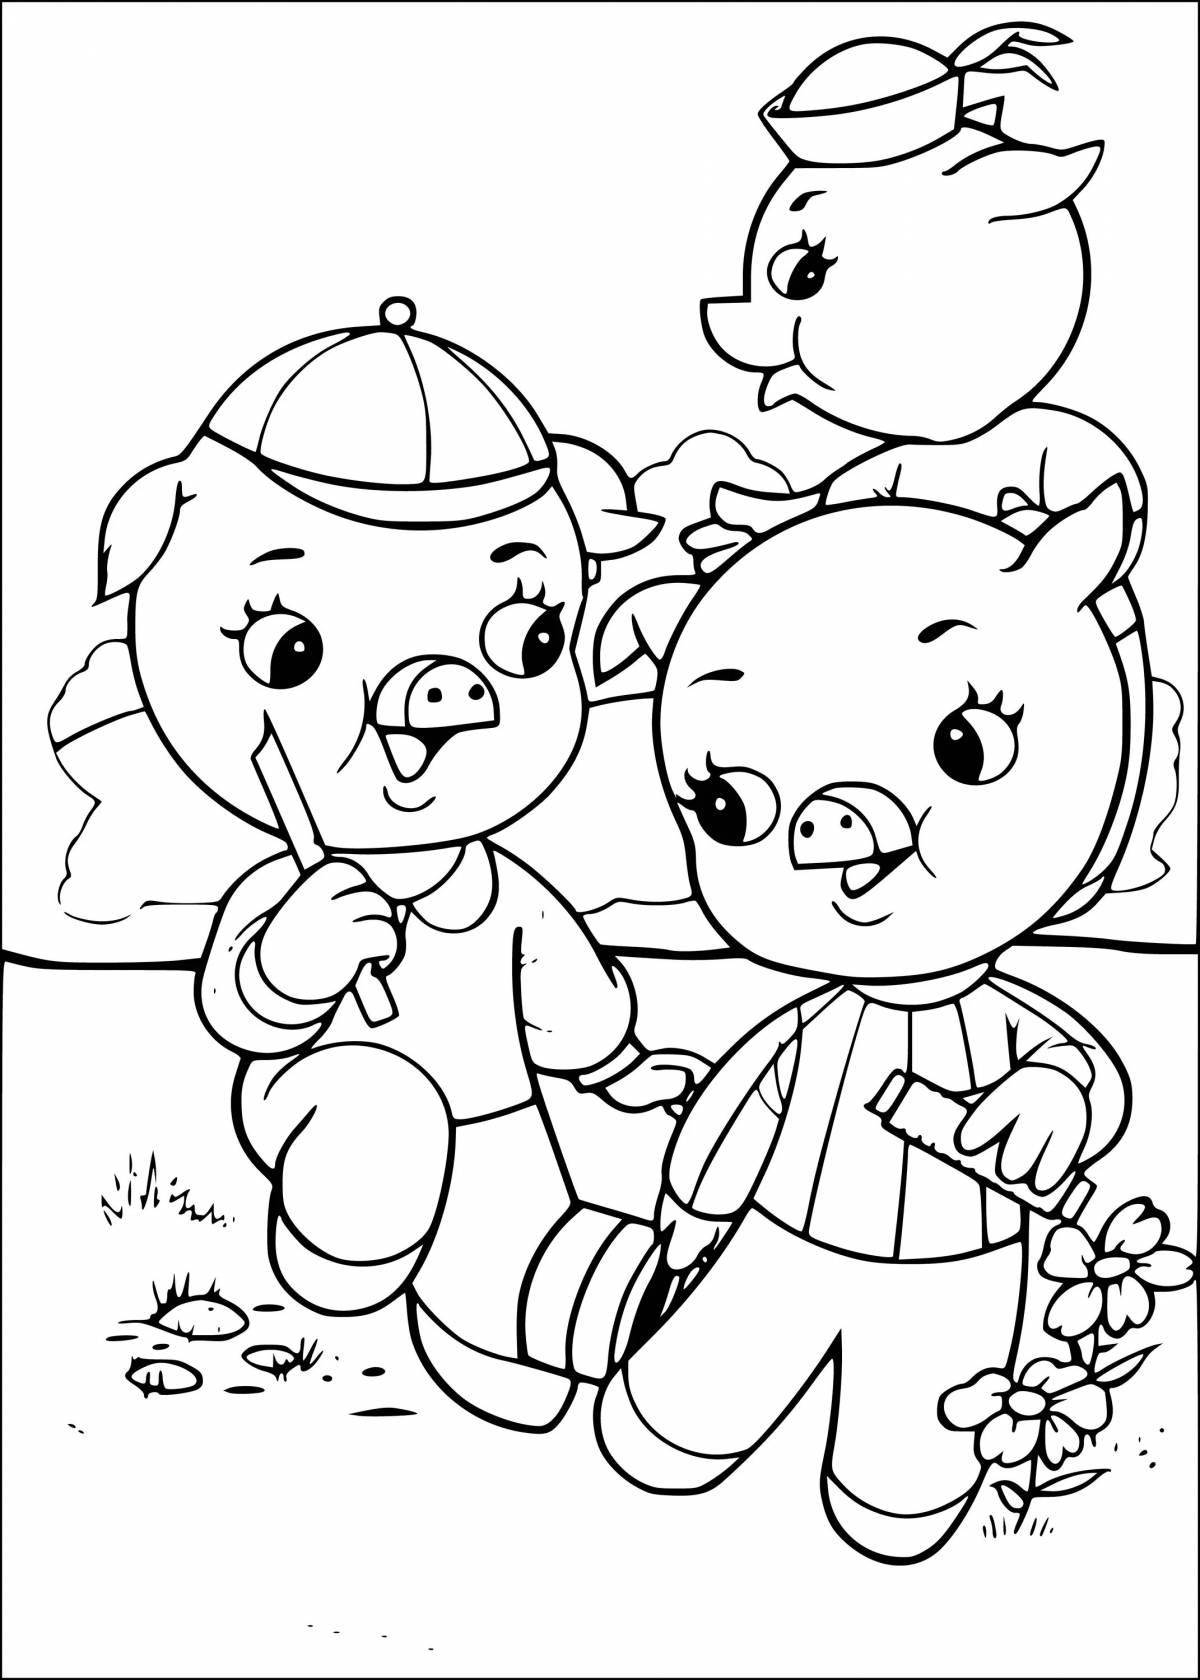 Colorful coloring three little pigs for children